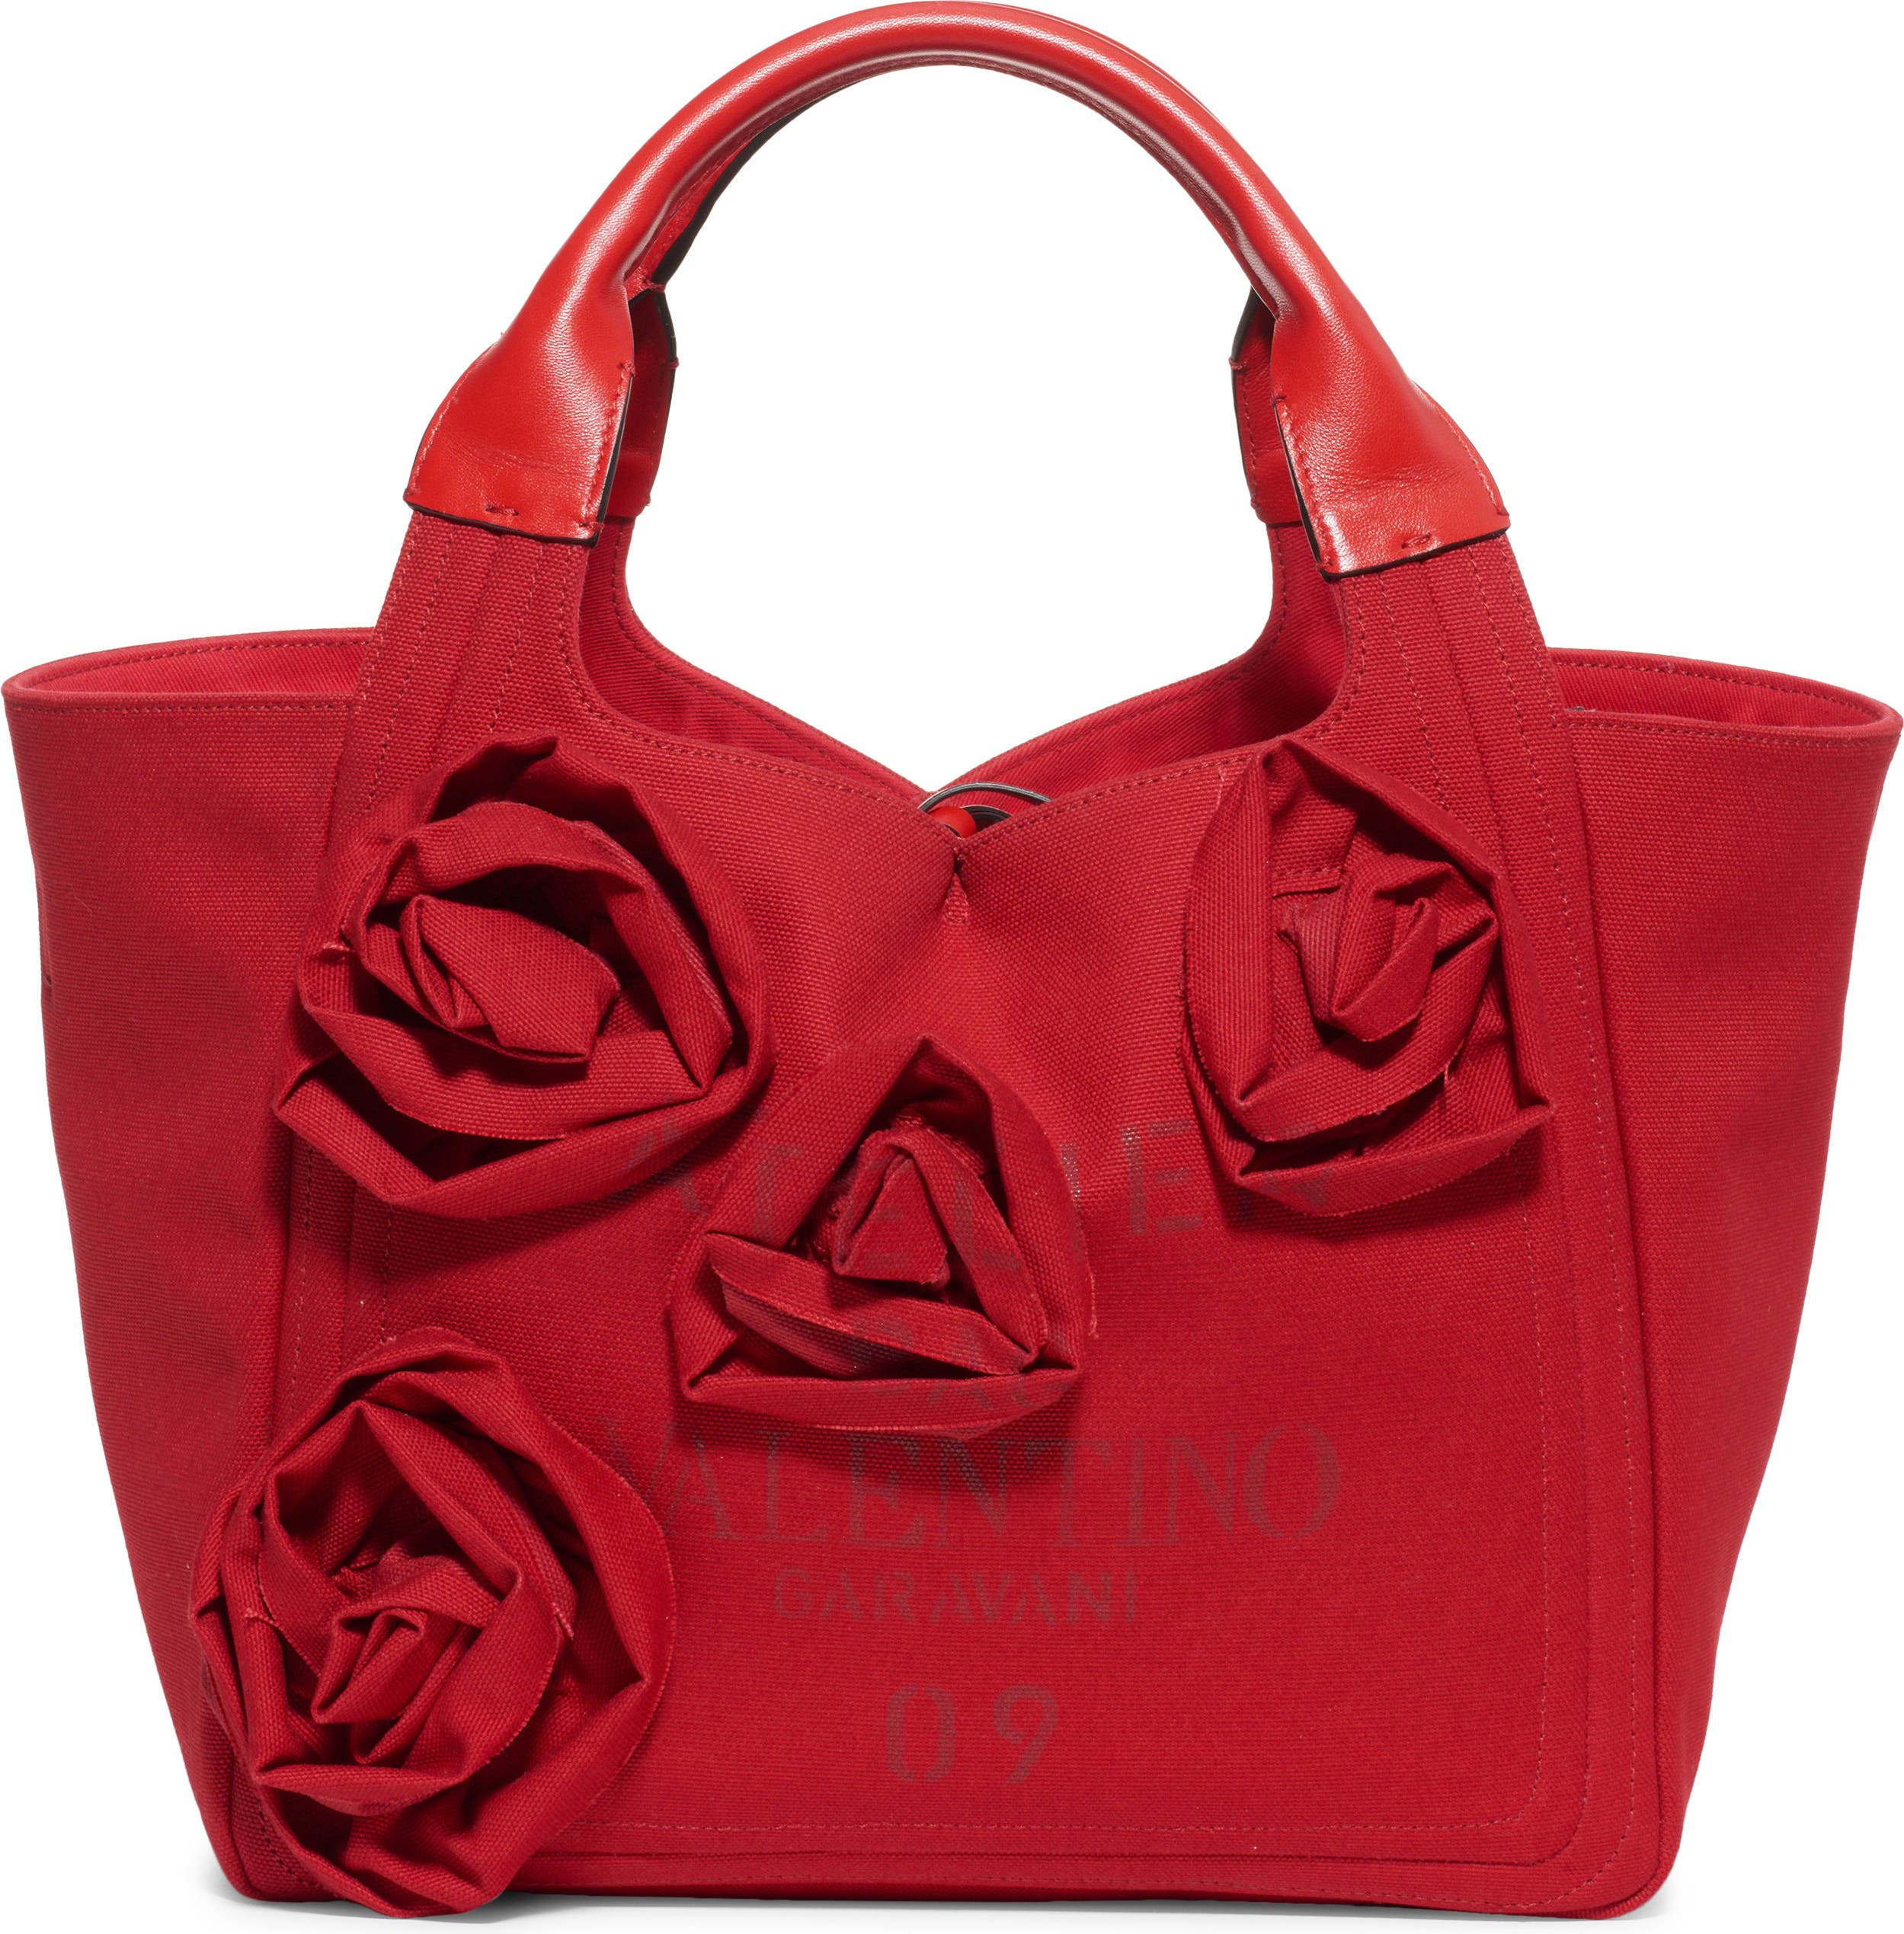 Patent Leather Womens H bags 3D Rose Flower Shoulder Bags Ladies Casual Totes H bag 